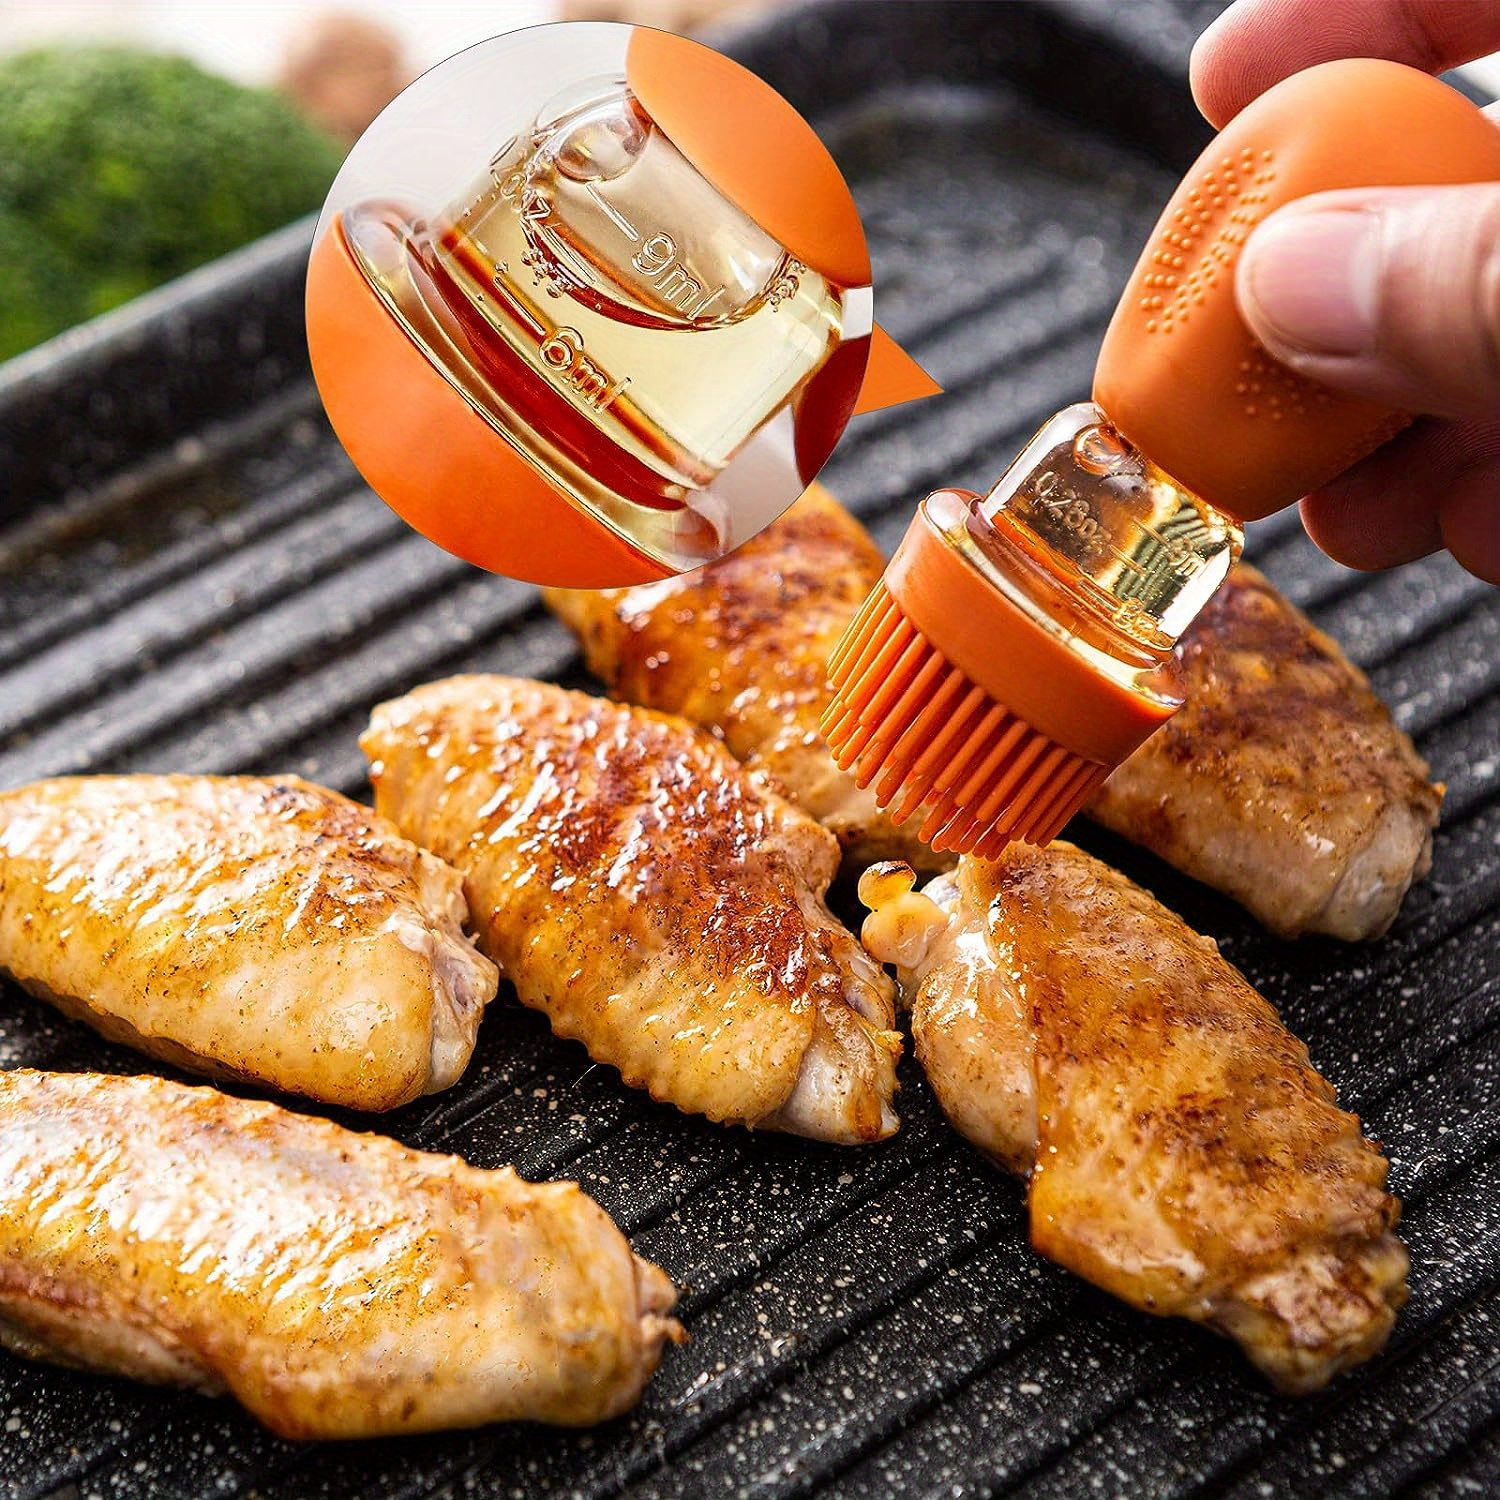 2 In 1 Grease Dispenser Bottle, Glass Bottle With Silicone Grill Brush,  Large Capacity Kitchen Grease Dispenser For Cooking, Grilling. 1 Pc Orange  Gre